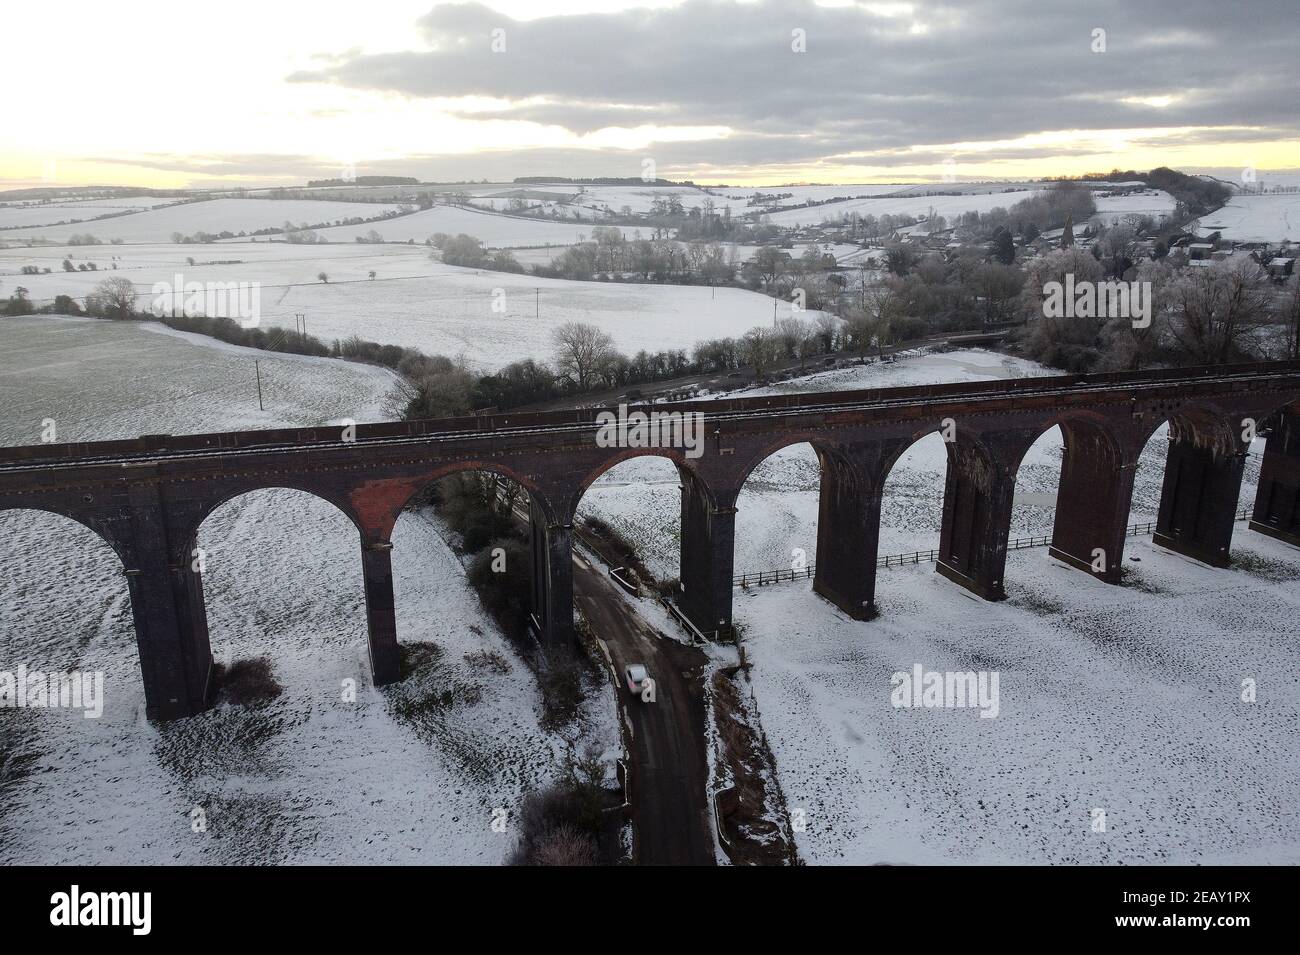 Seaton, Rutland, UK. 11th February 2021. UK weather. The sun rises behind the Welland Valley Viaduct as the temperature in the UK plummeted to its lowest in a decade. Credit Darren Staples/Alamy Live News. Stock Photo